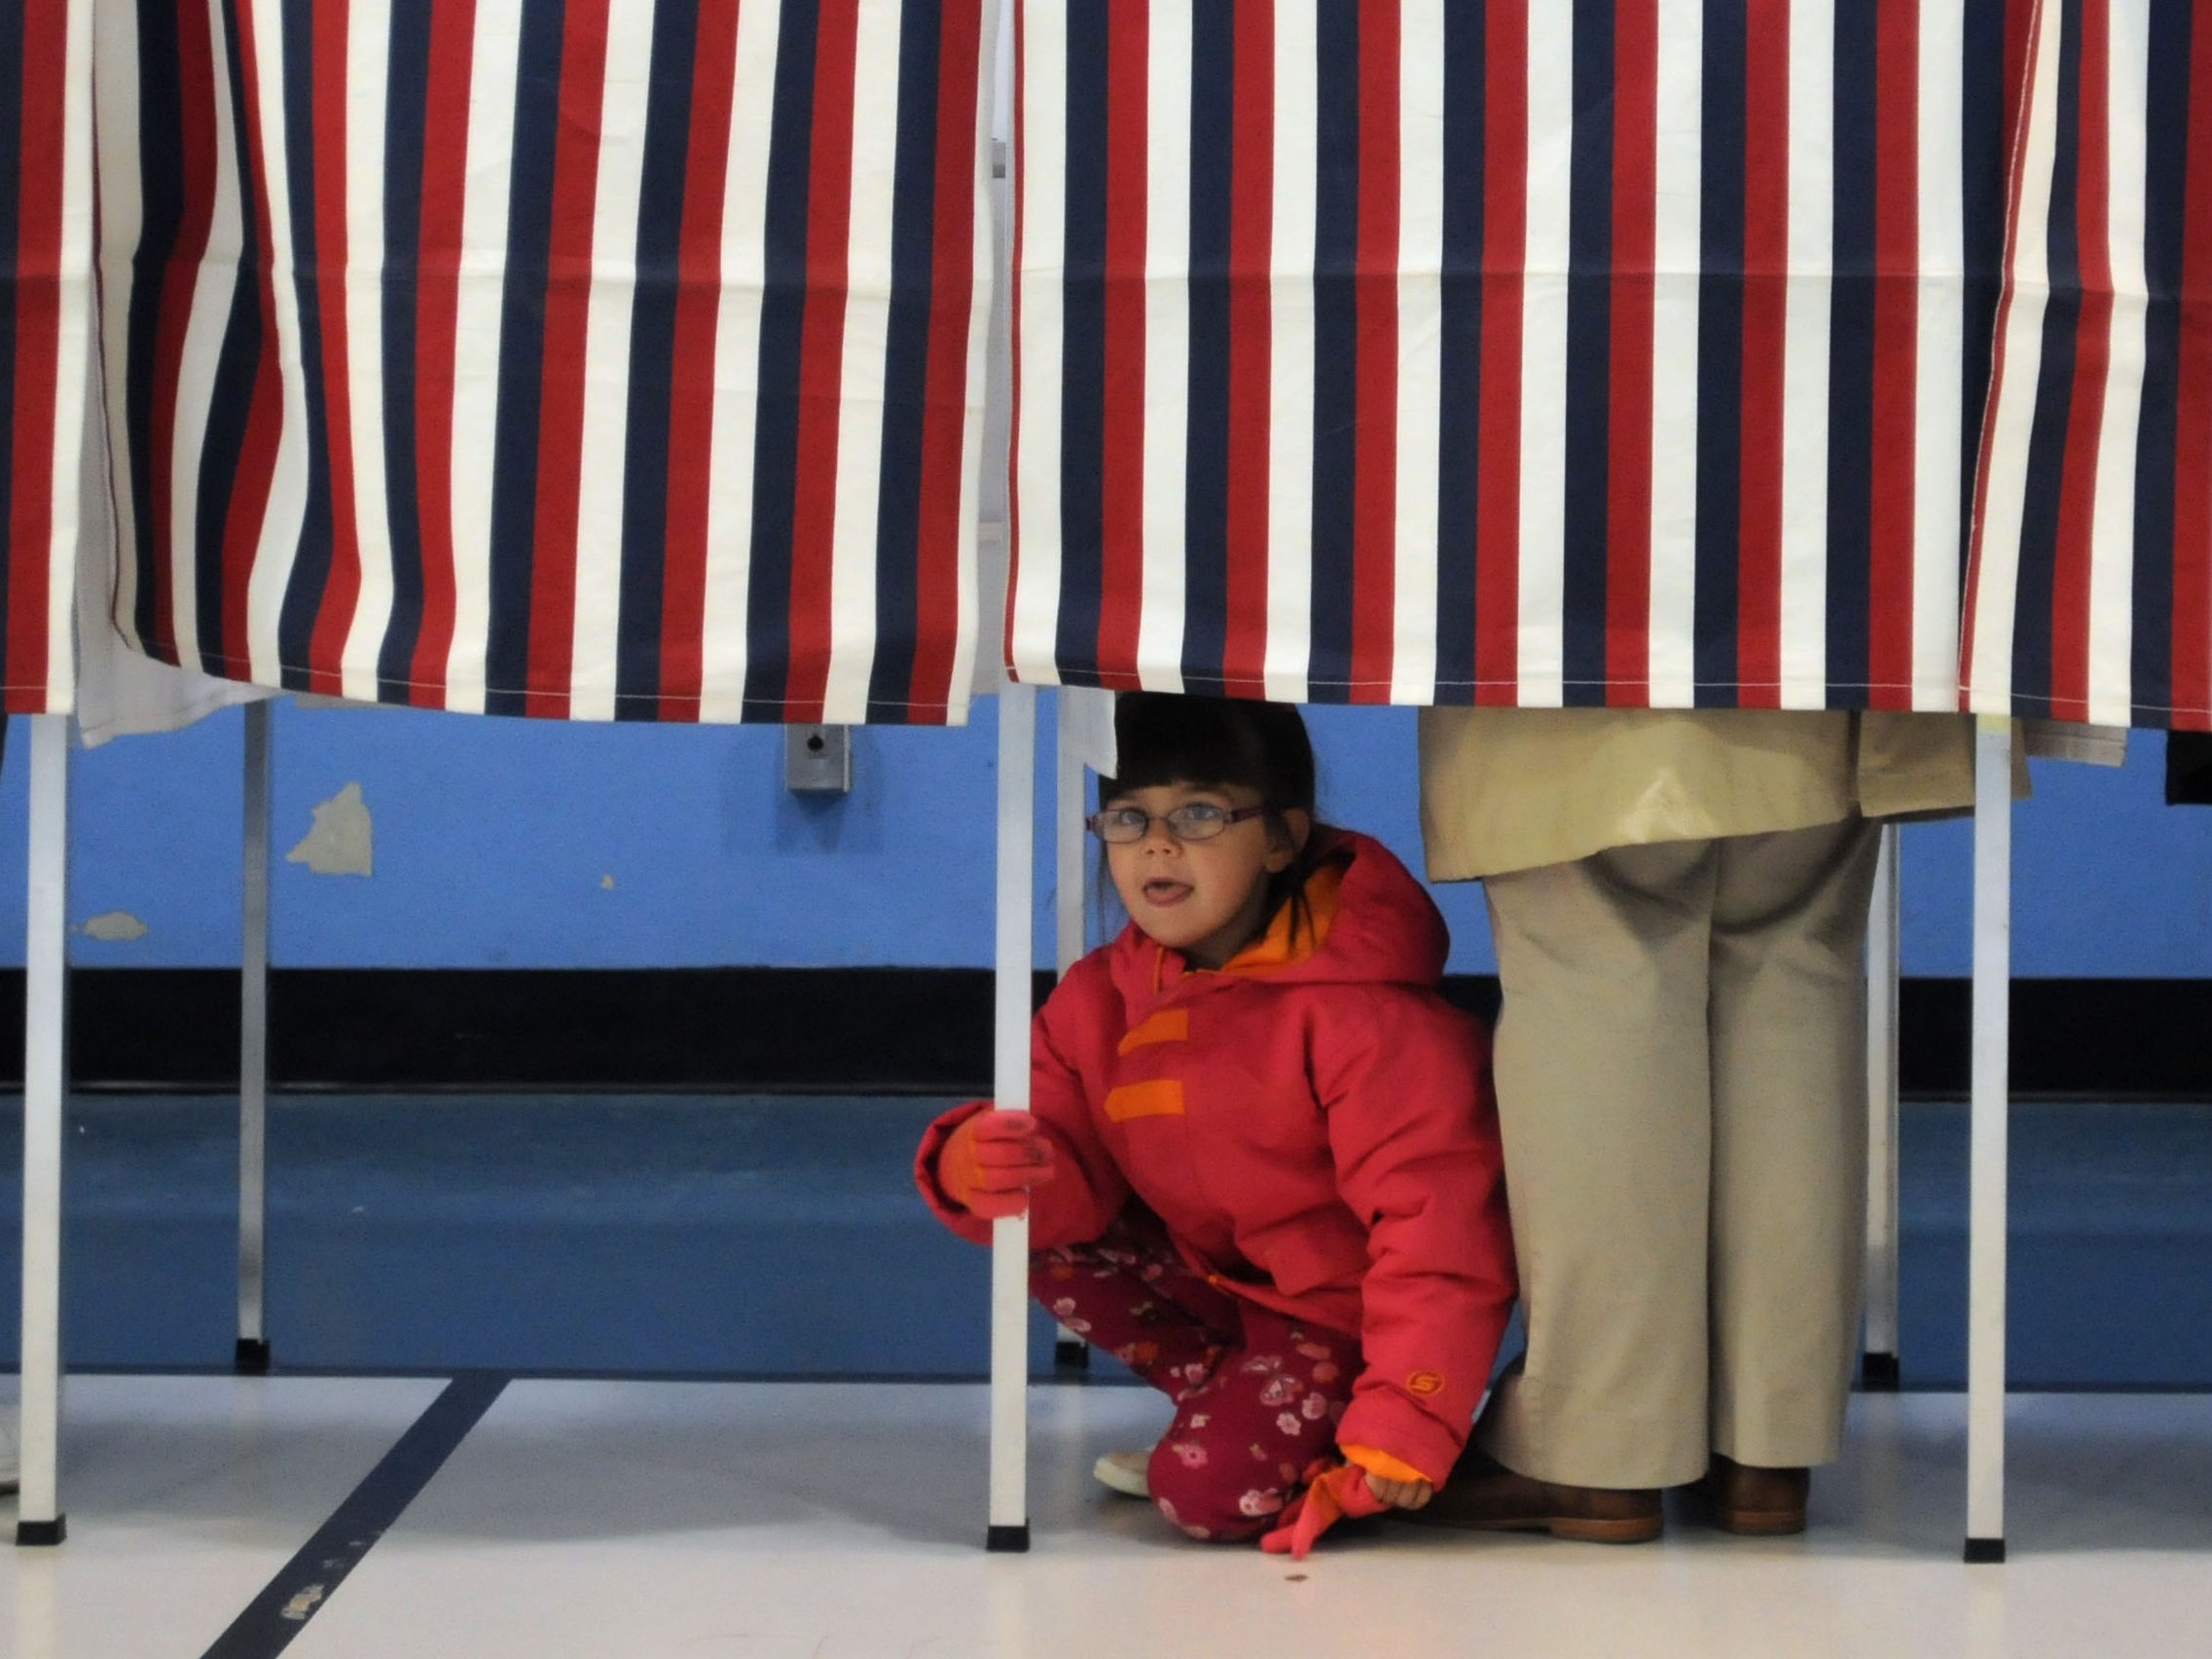 A young girl looks out from a voting booth as her mother casts her ballot at the Bishop Leo O'Neil Youth Center on November 6, 2012 in Manchester, New Hampshire. The swing state of New Hampshire is recognised to be a hotly contested battleground that offers 4 electoral votes, as recent polls predict that the race between U.S. President Barack Obama and Republican presidential candidate Mitt Romney remains tight. (Photo by Darren McCollester/Getty Images)